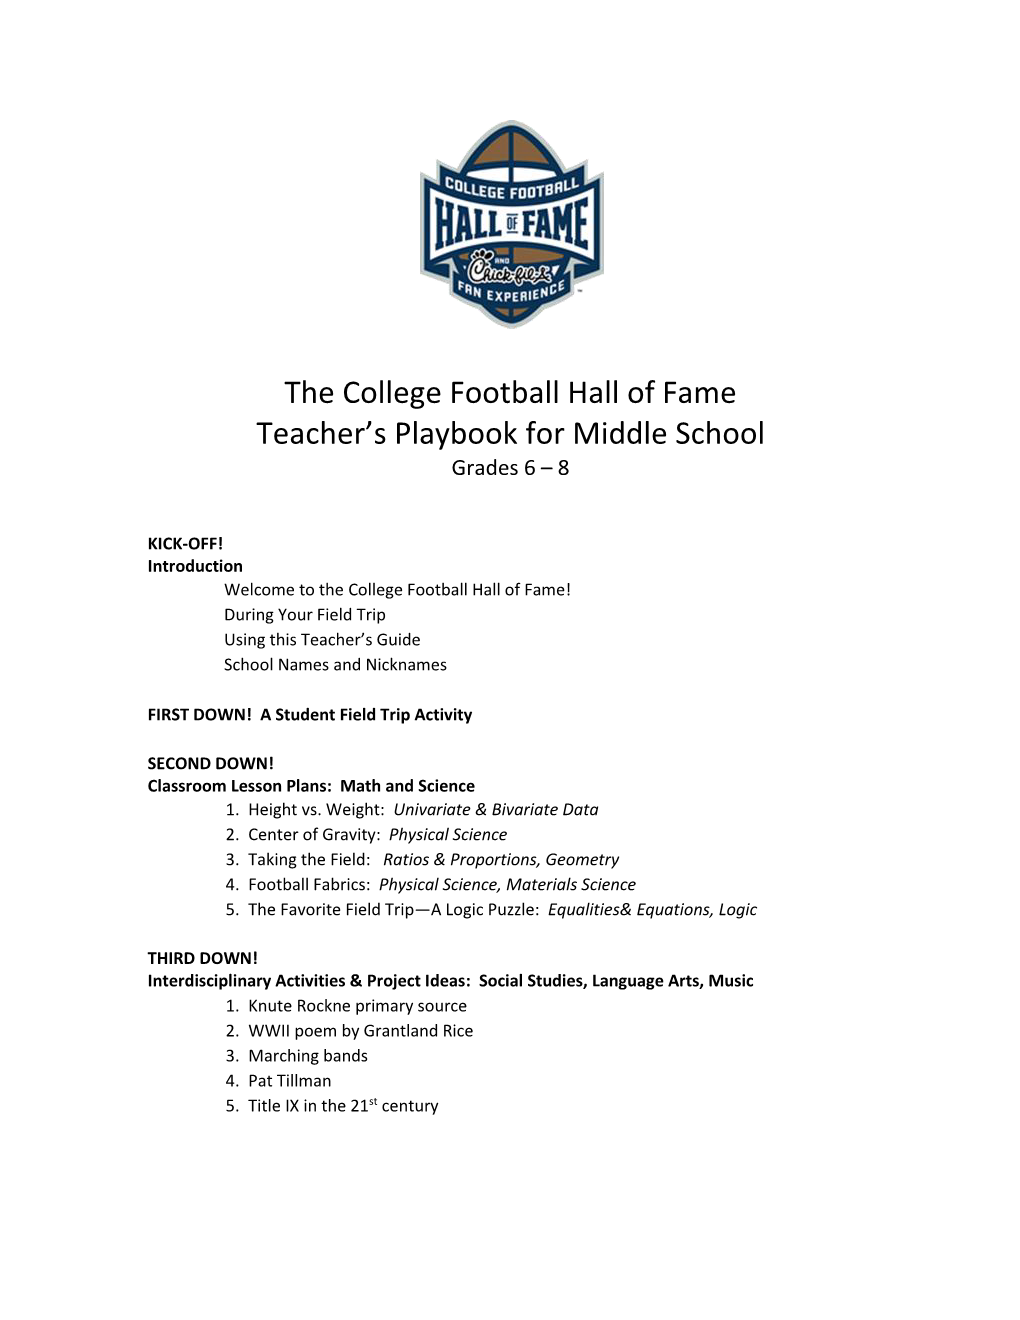 The College Football Hall of Fame Teacher's Playbook for Middle School